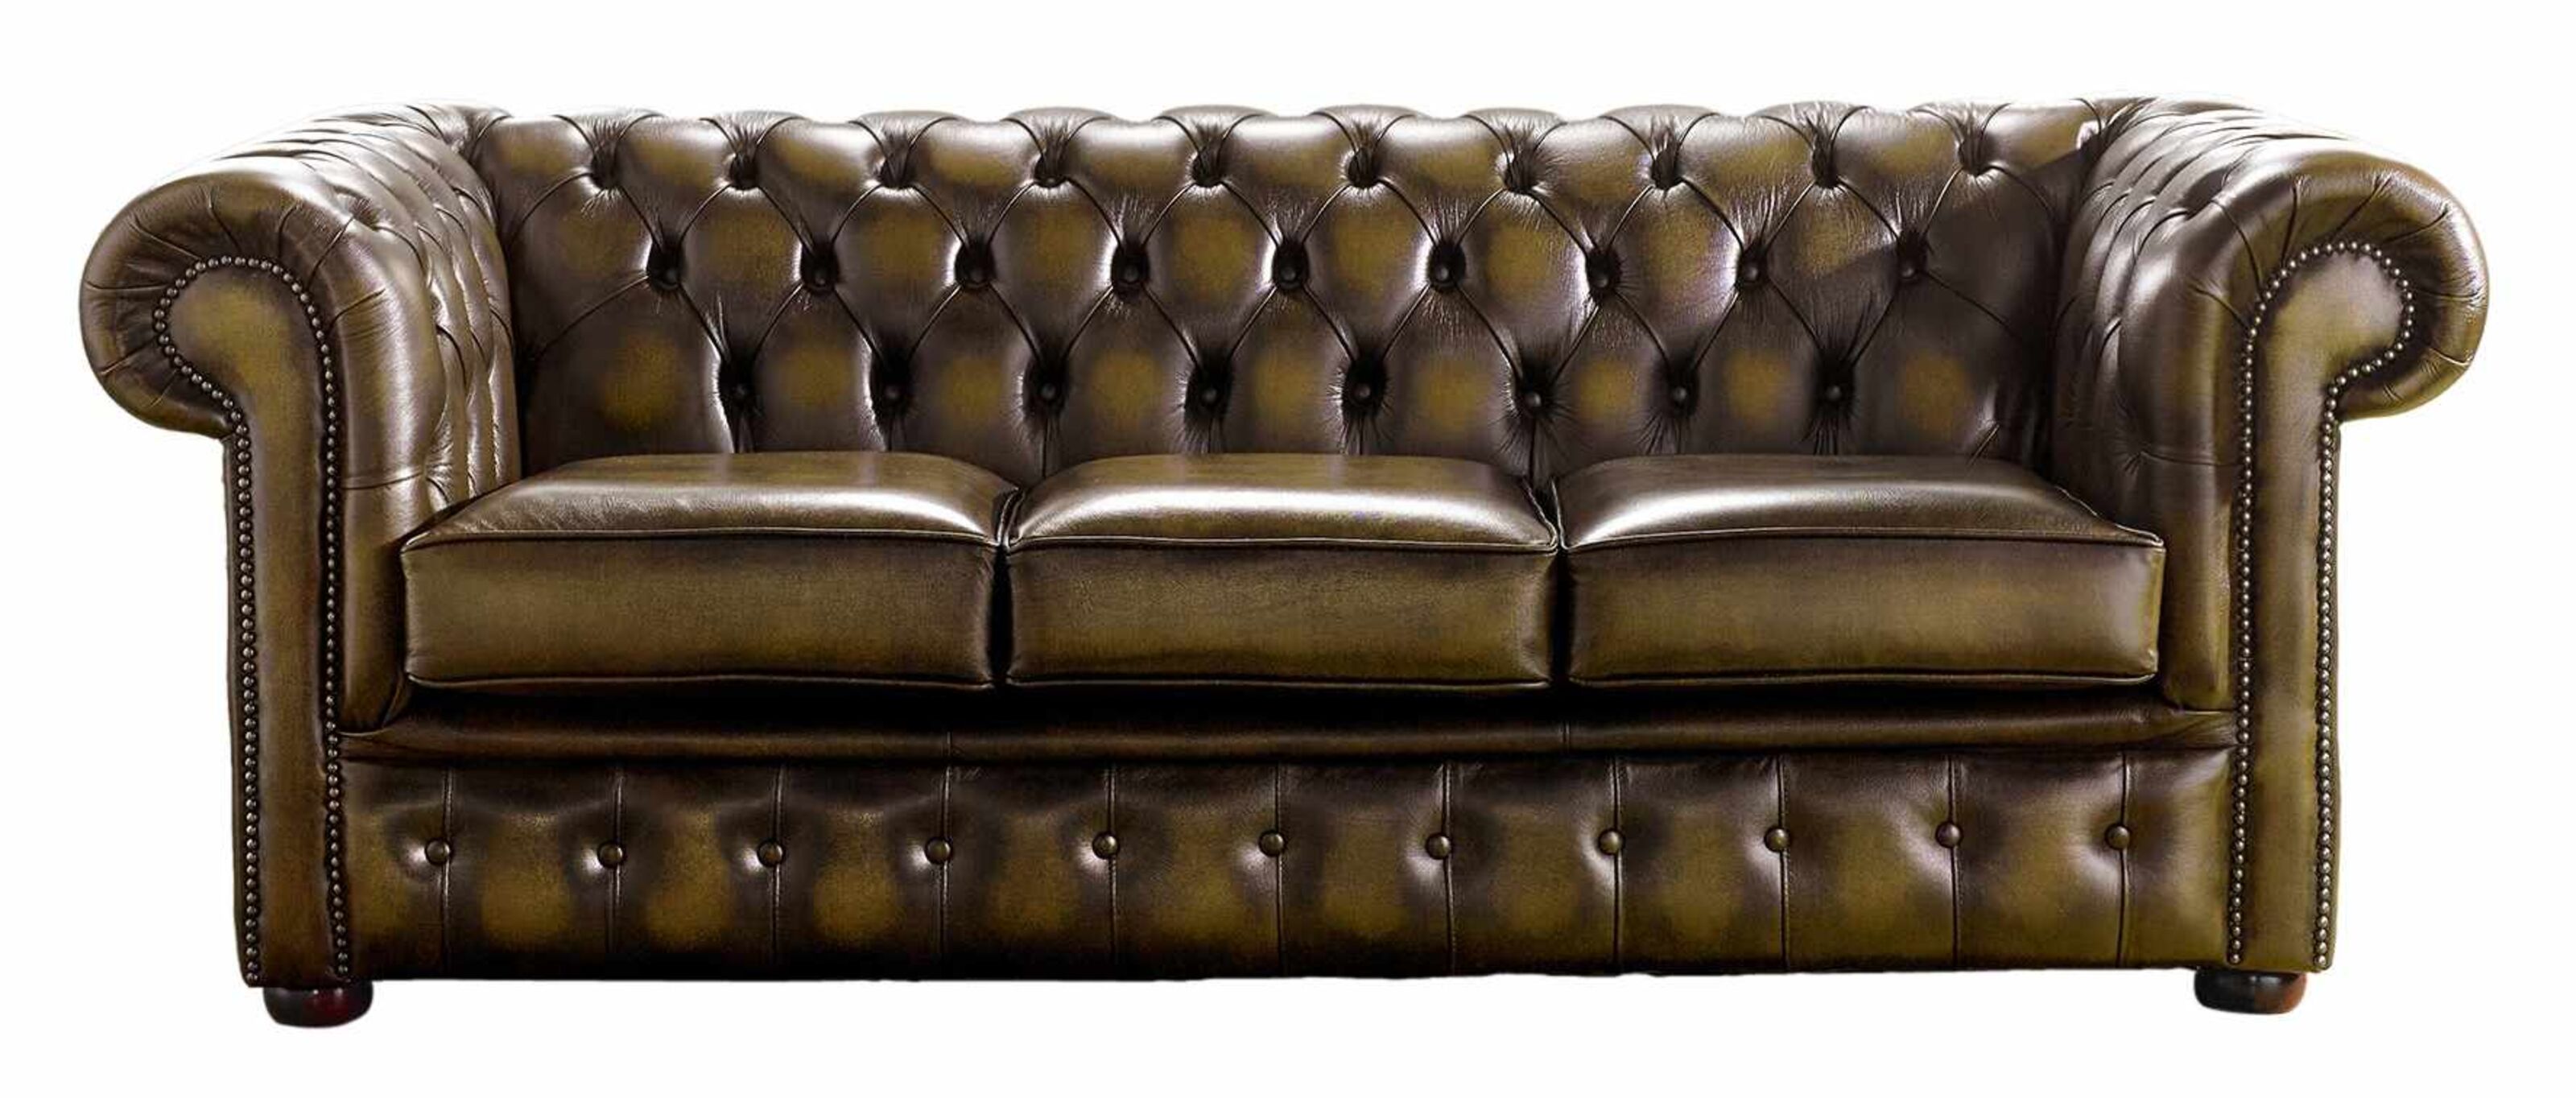 Couch or Chesterfield? Recognizing the Differences  %Post Title